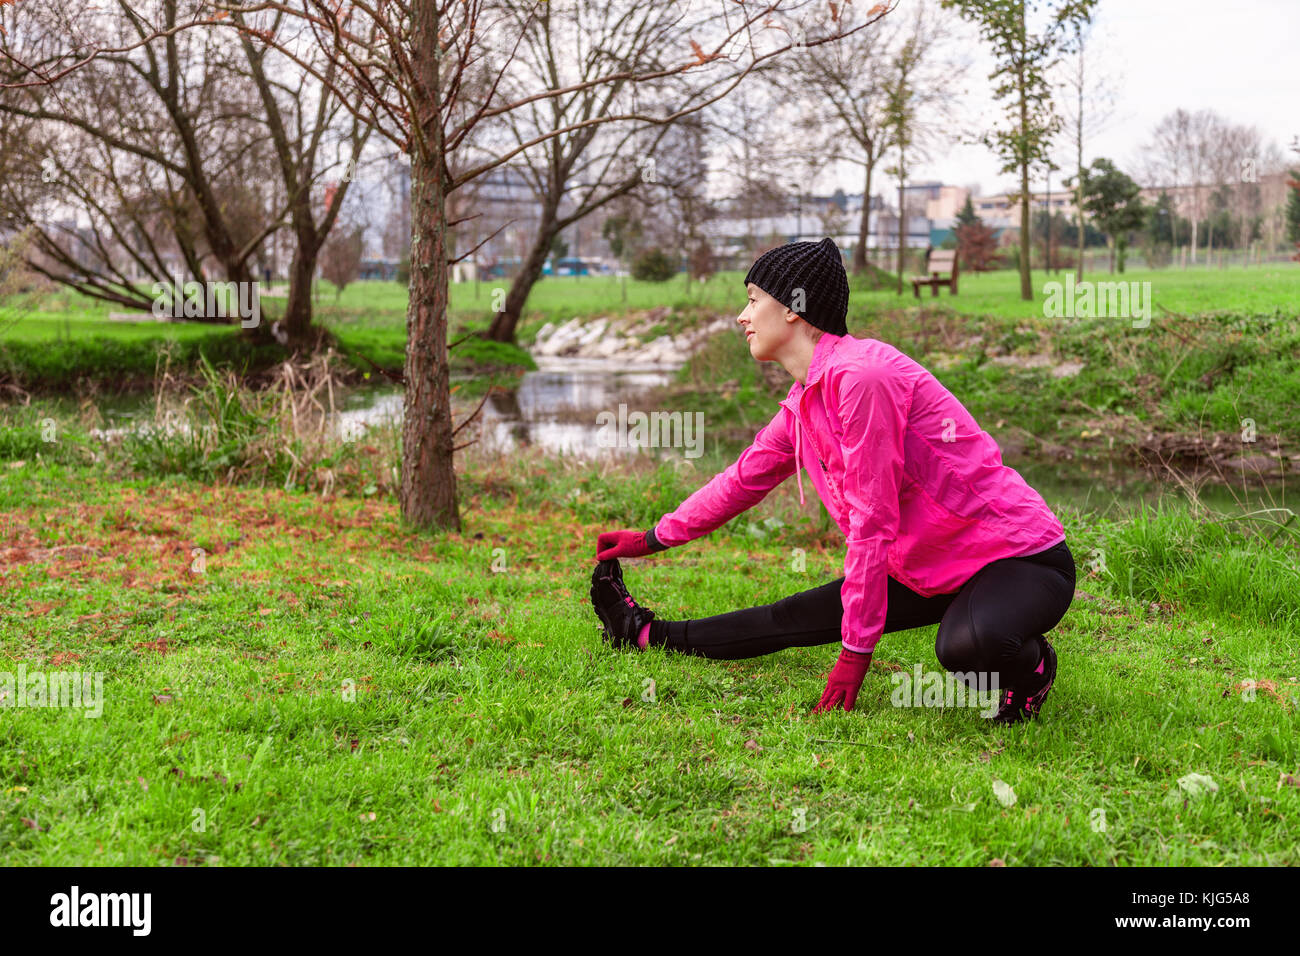 Young woman warming up and stretching the legs before running on a cold winter, autumn of fall day in an urban park. Female athlete wearing pink windb Stock Photo